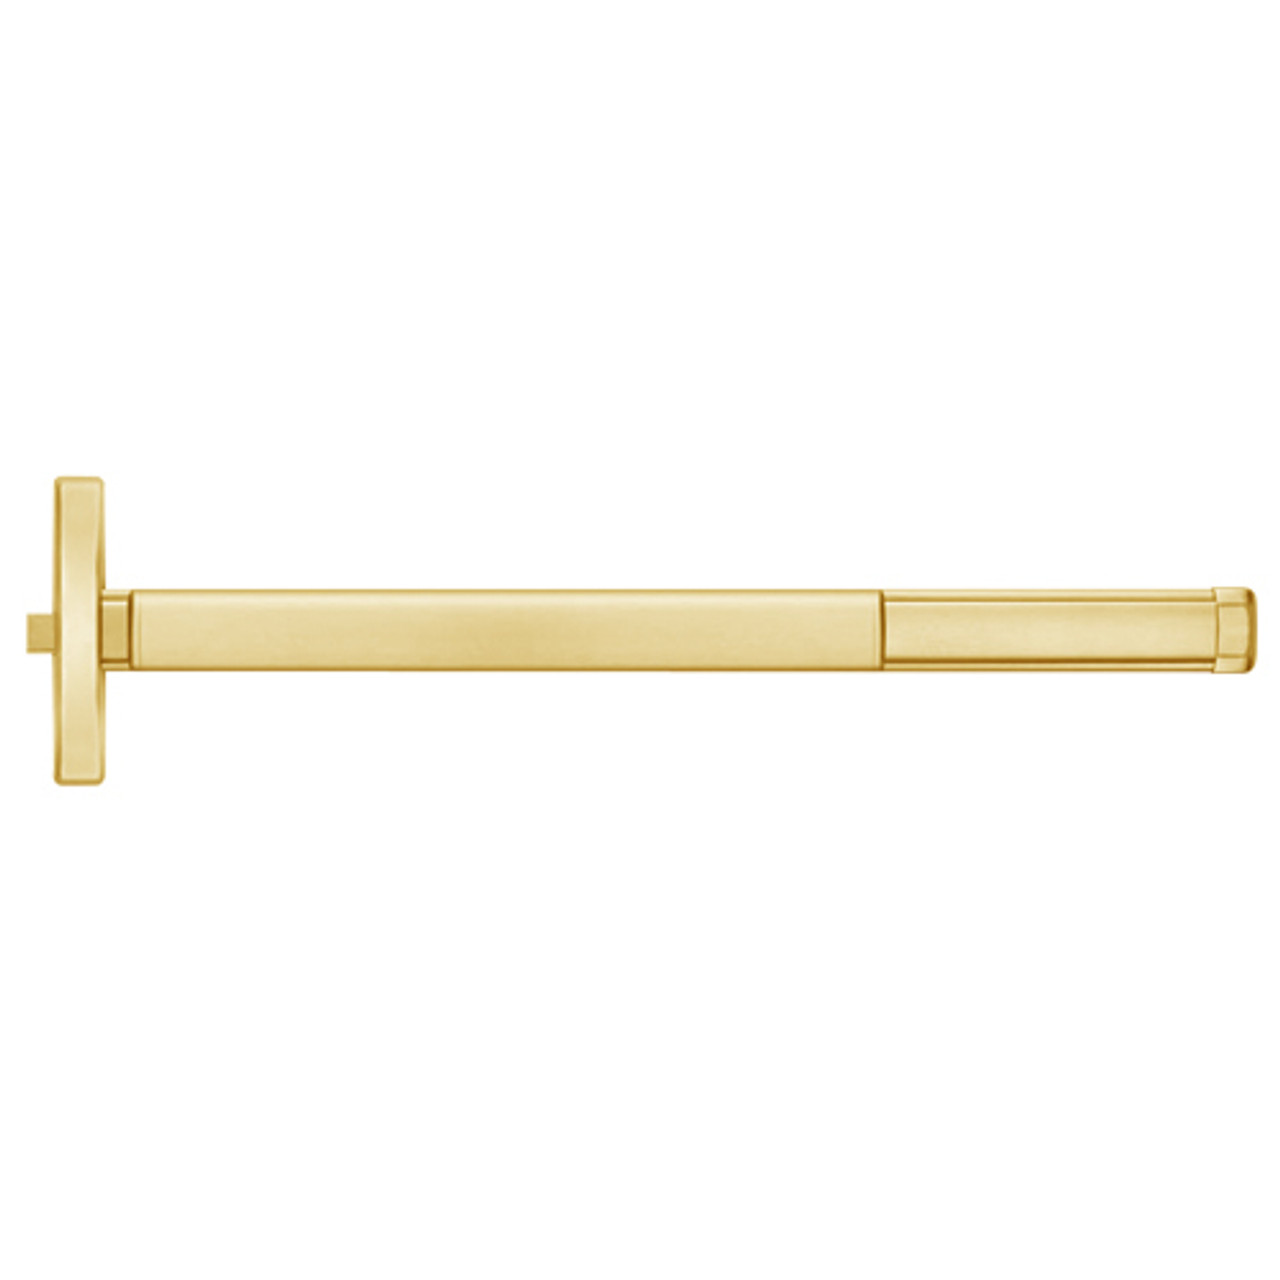 ELRFL2403-605-48 PHI 2400 Series Fire Rated Apex Rim Exit Device with Electric Latch Retraction Prepped for Key Retracts Latchbolt in Bright Brass Finish